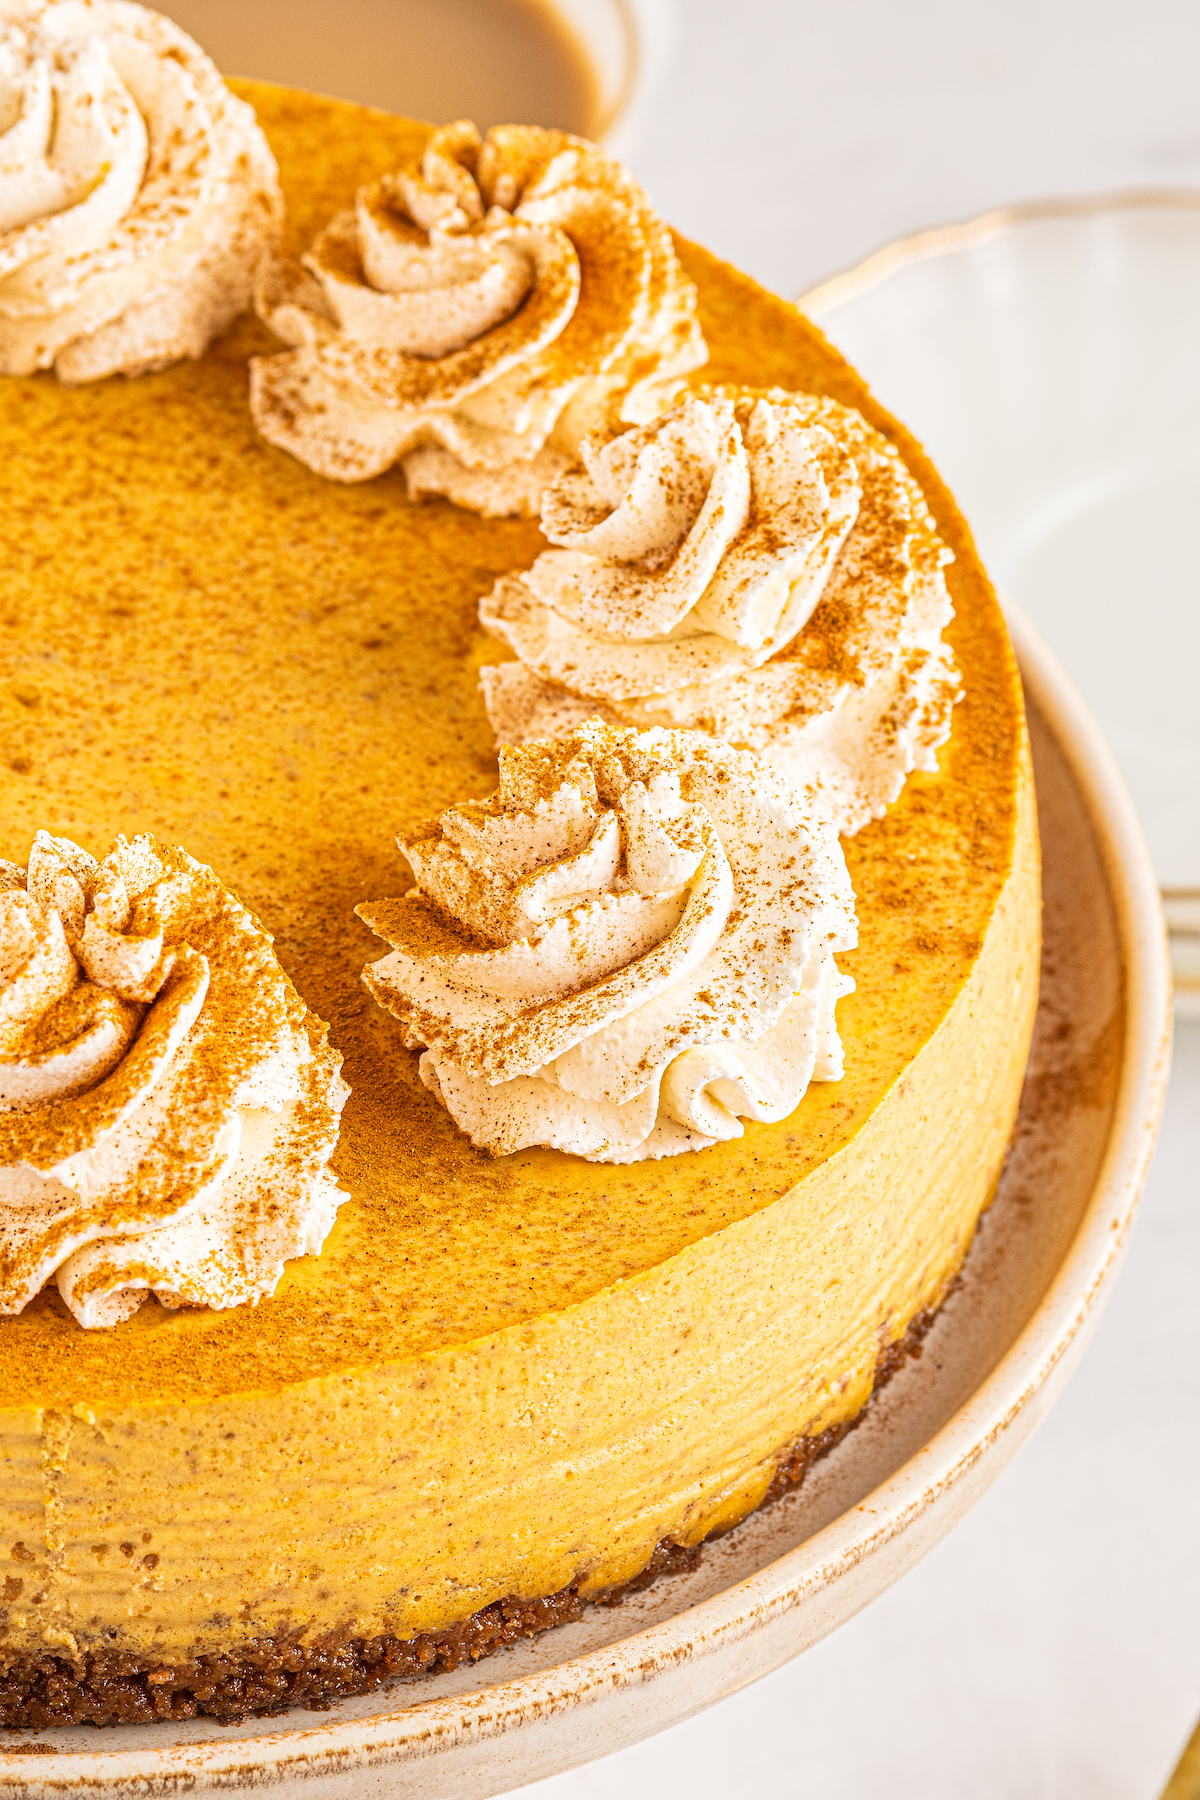 Swirls of piped whipped cream decorate a fall cheesecake.